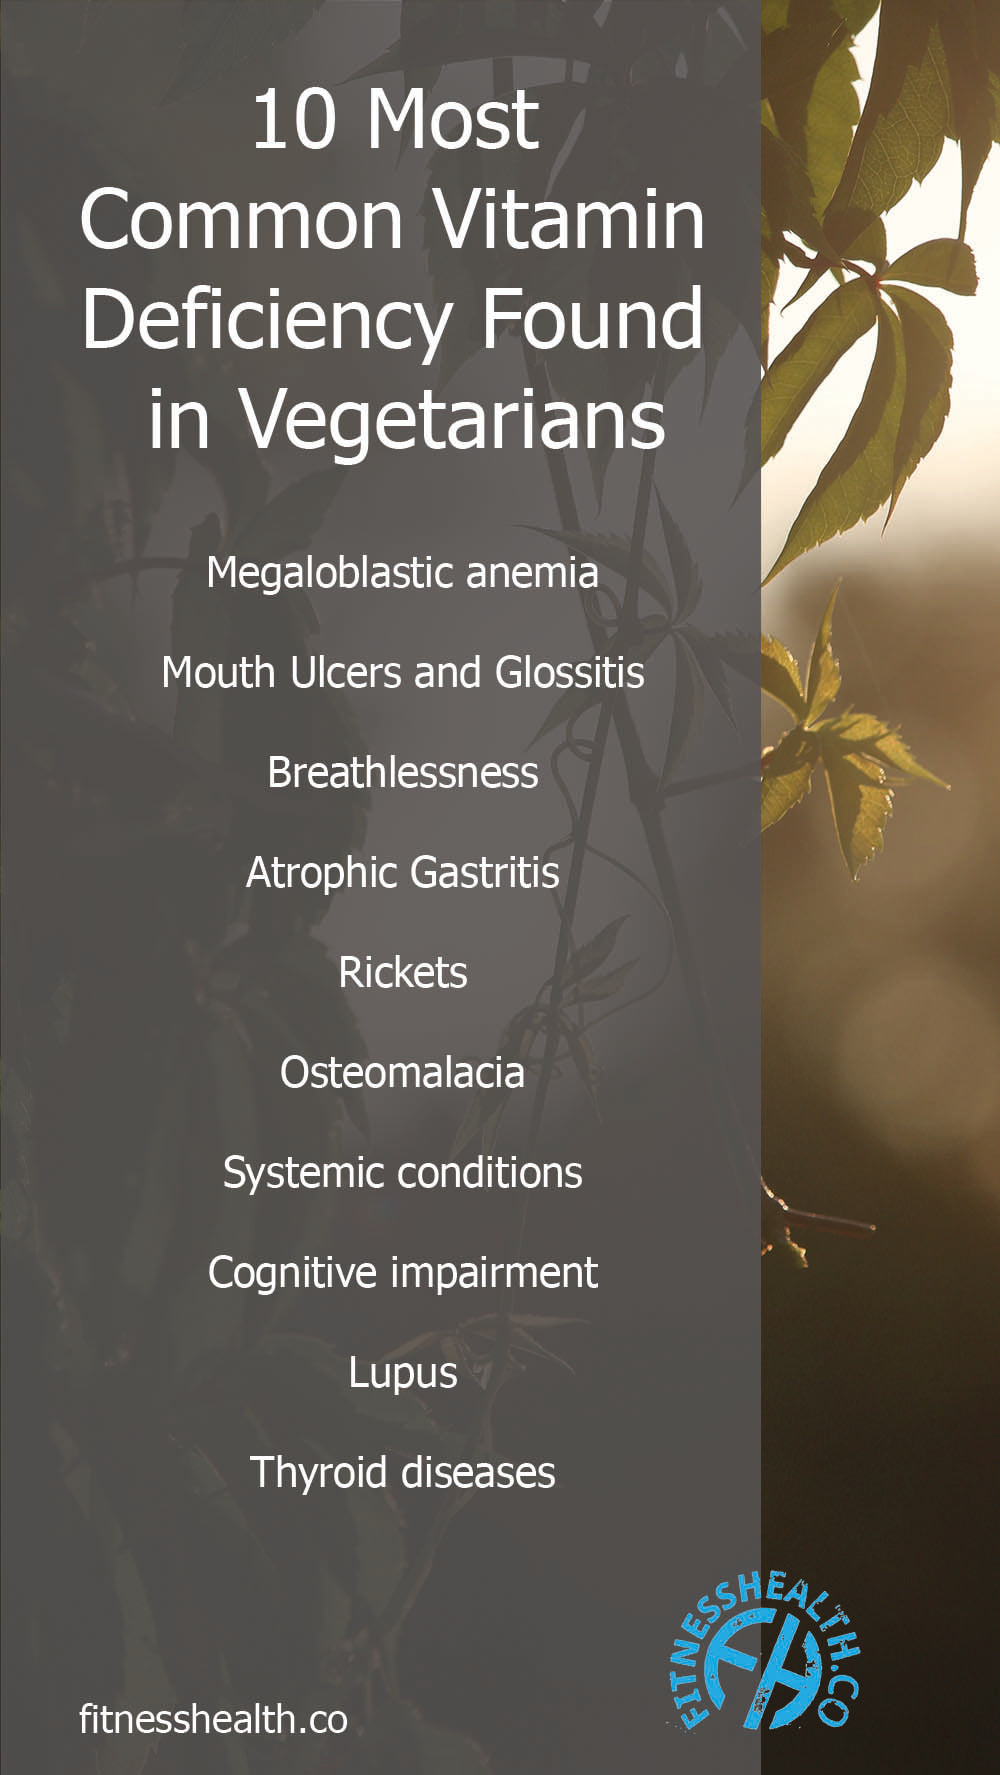 10 Most Common Vitamin Deficiency Found in Vegetarians - Fitness Health 